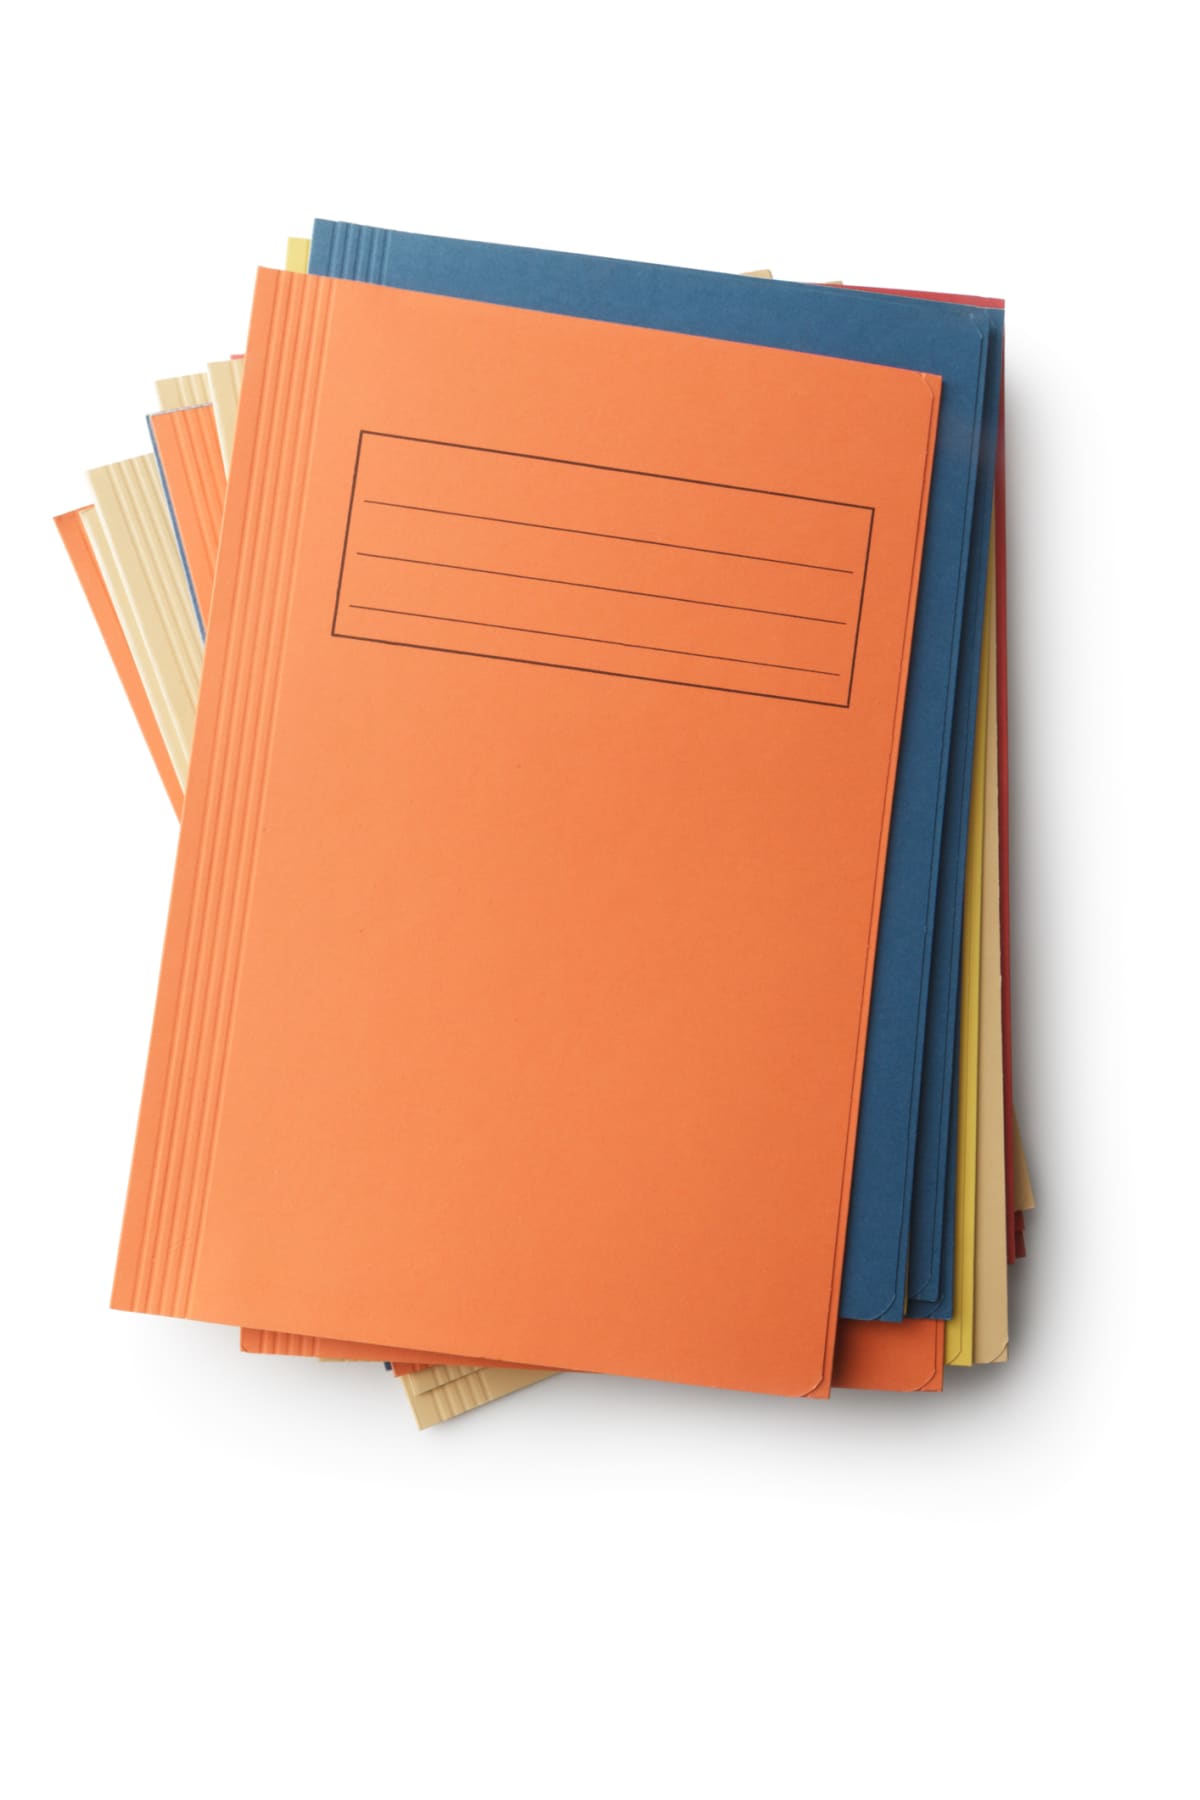 Folders containing documents